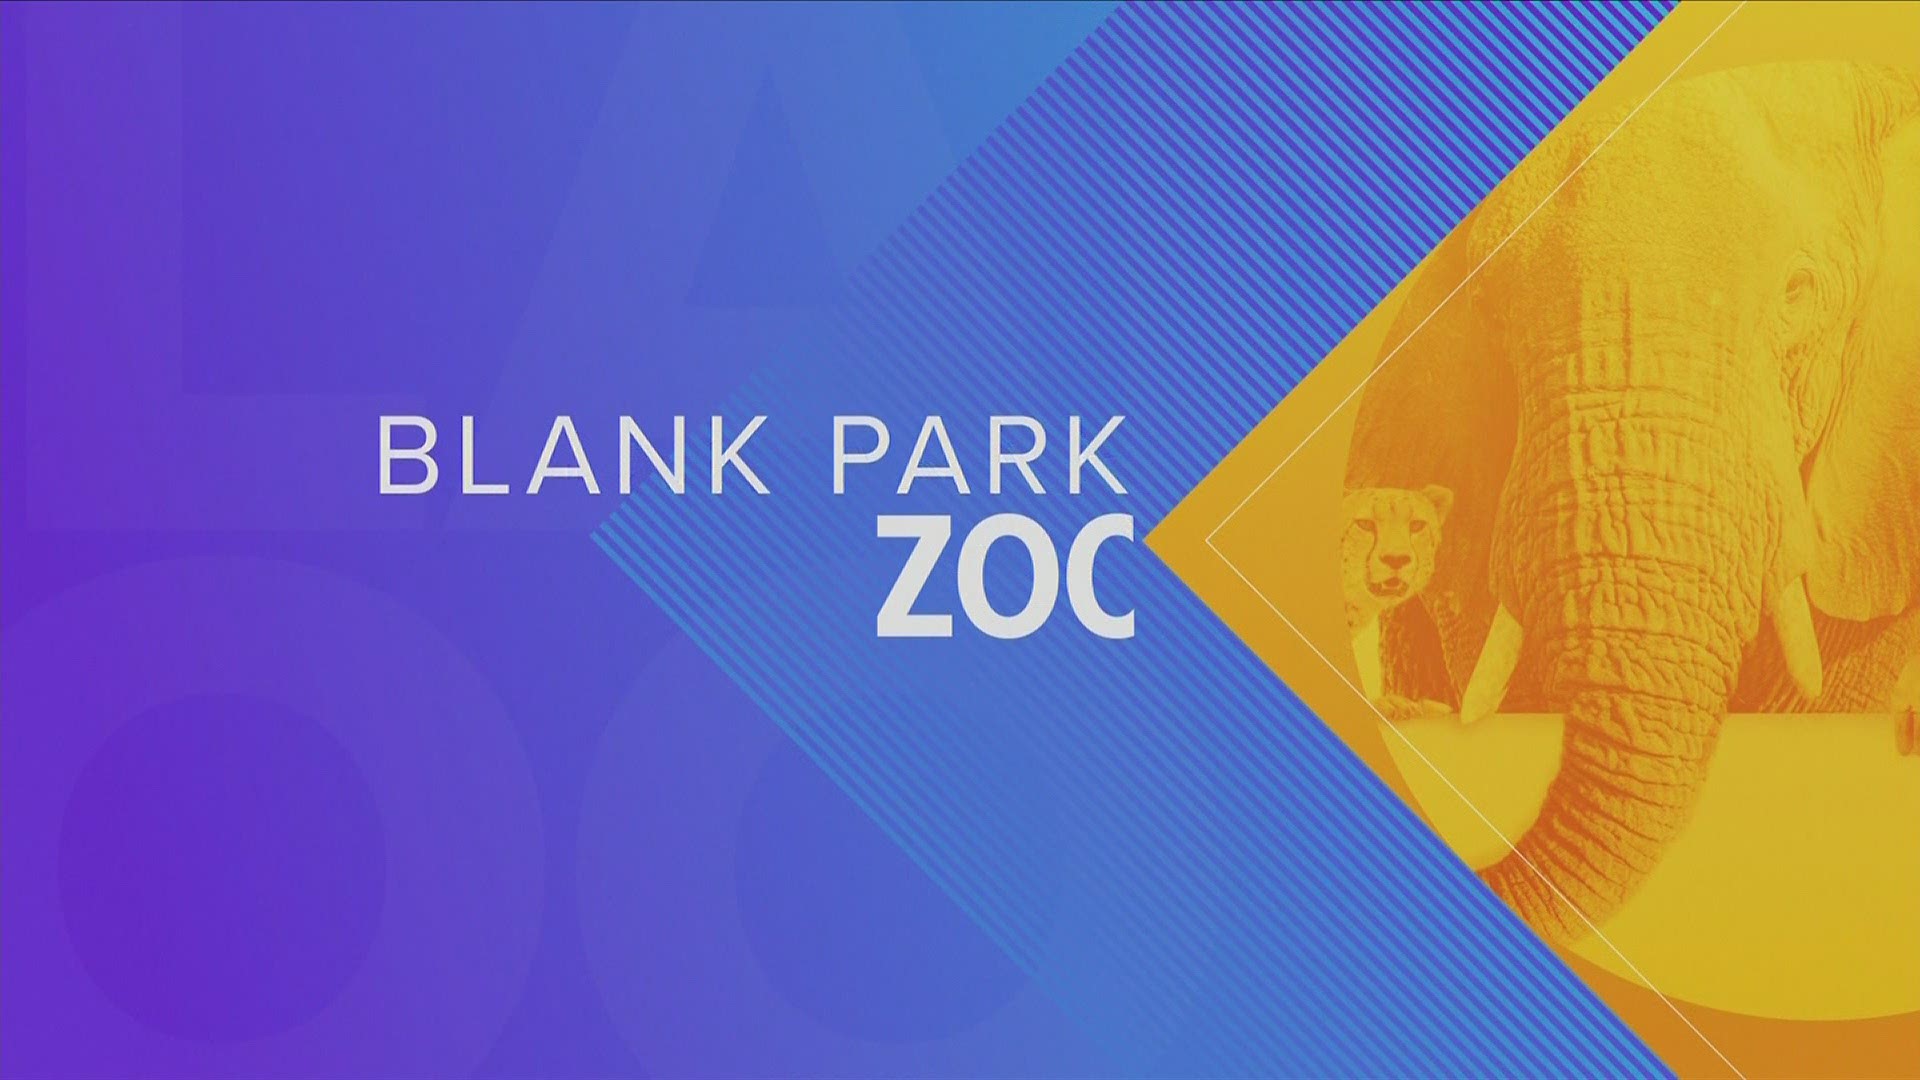 THAT'S A BIG BOA! Lou goes BEYOND LIVE with with the Blank Park Zoo and special guest, Jersey the HUGE Boa Constrictor! Also, fun Valentine's activities this weekend